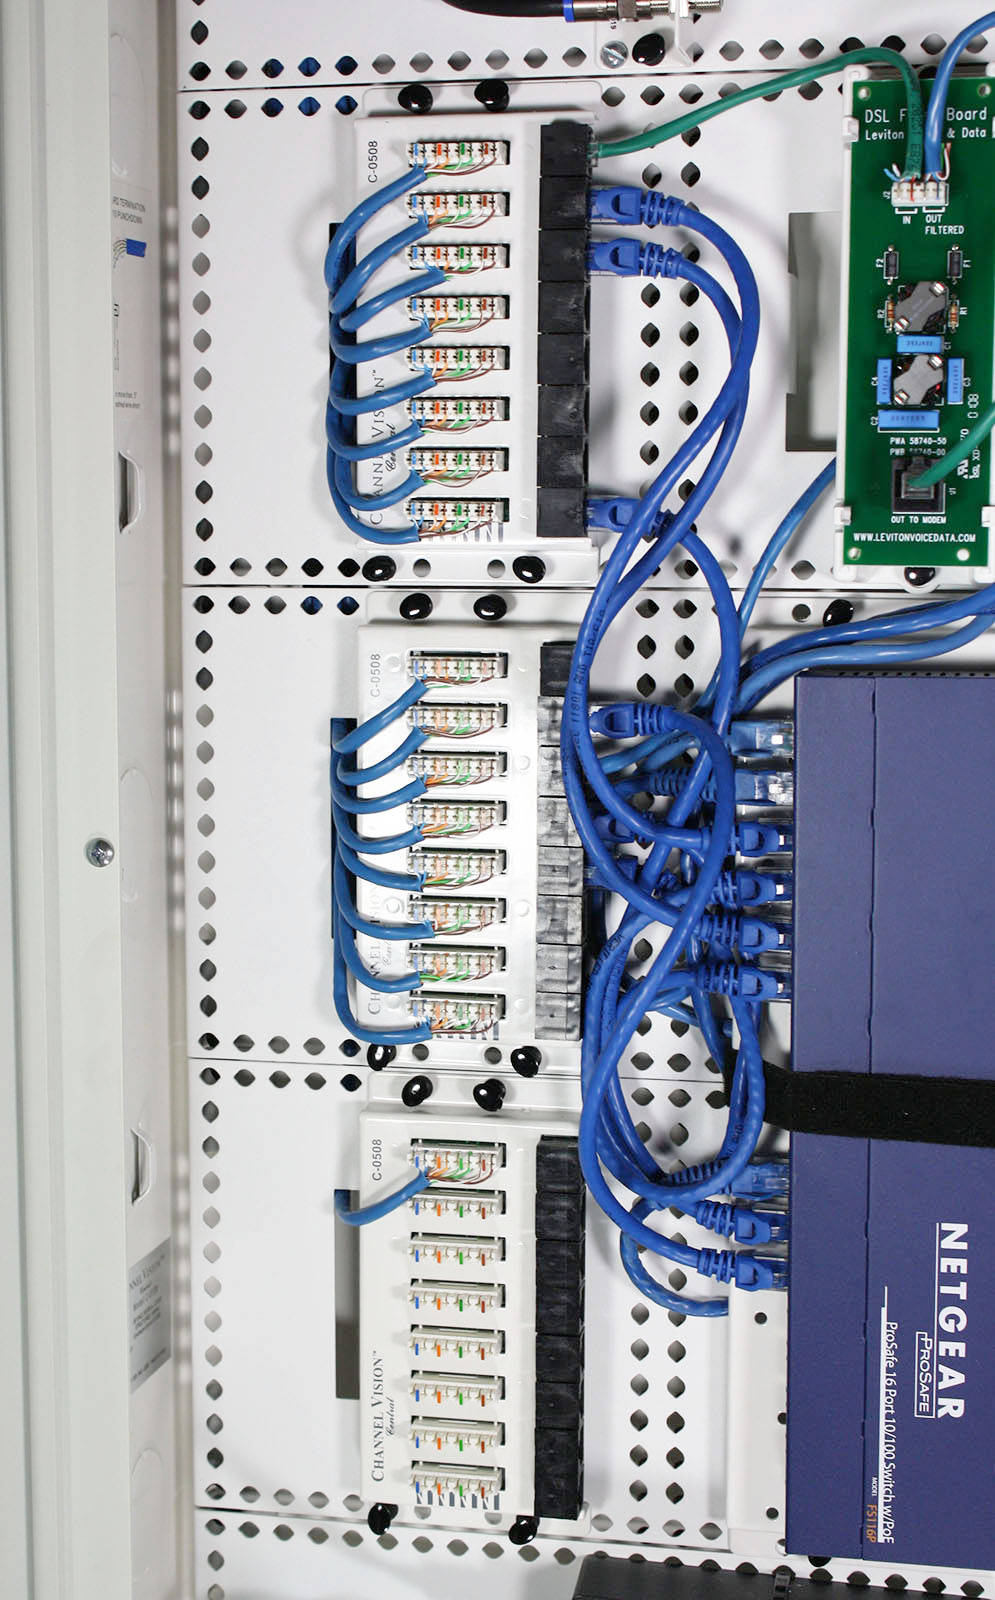 how to use a patch panel at home